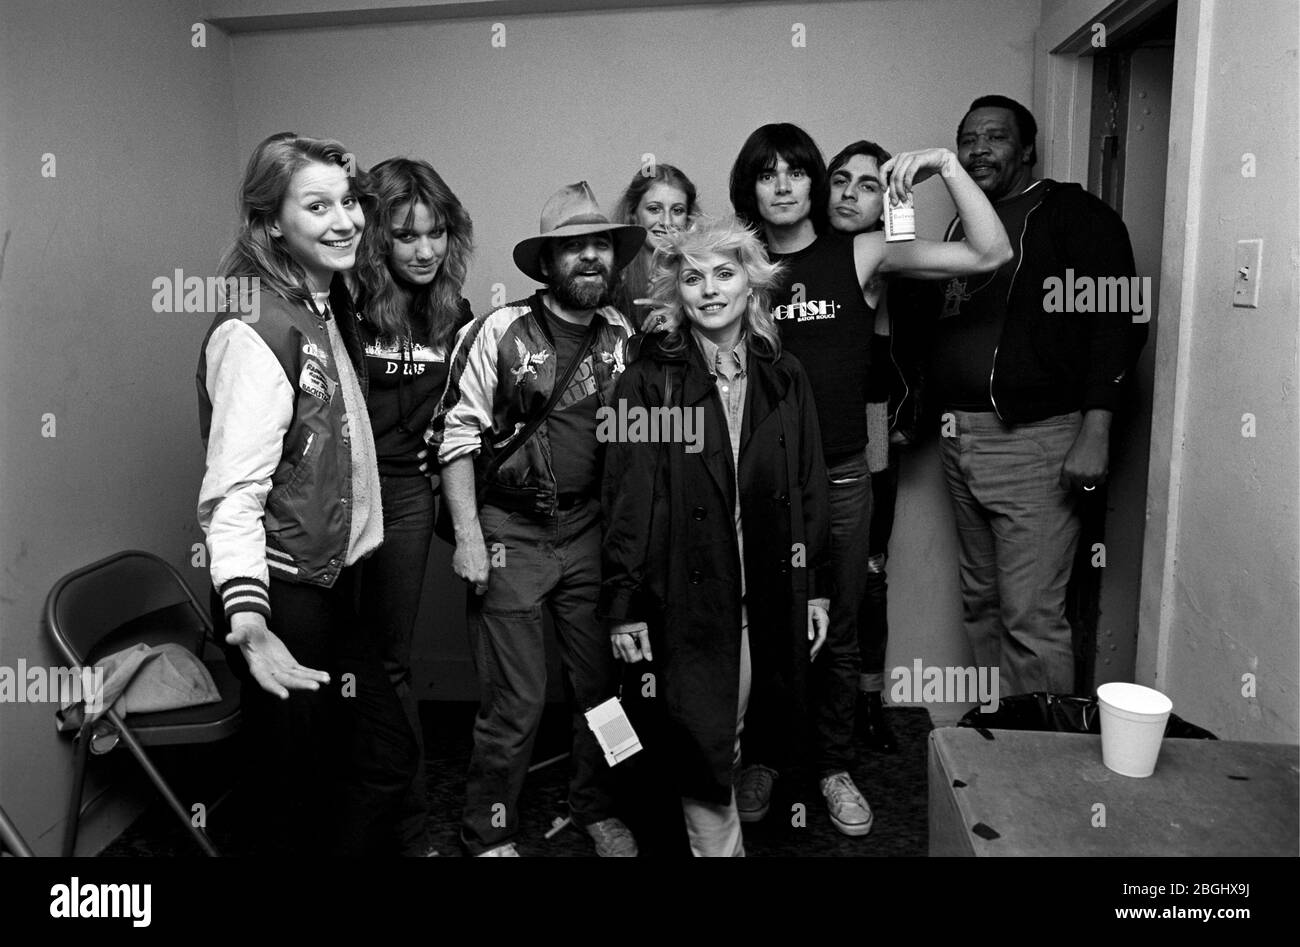 Debbie Harry of Blondie, Dee Dee Ramone of The Ramones & Chris Stein of Blondie backstage with others at the Tower Theatre for a gig by The Runaways, The Ramones & The Jam. March 18, 1978.Credit: Scott Weiner/MediaPunch Stock Photo